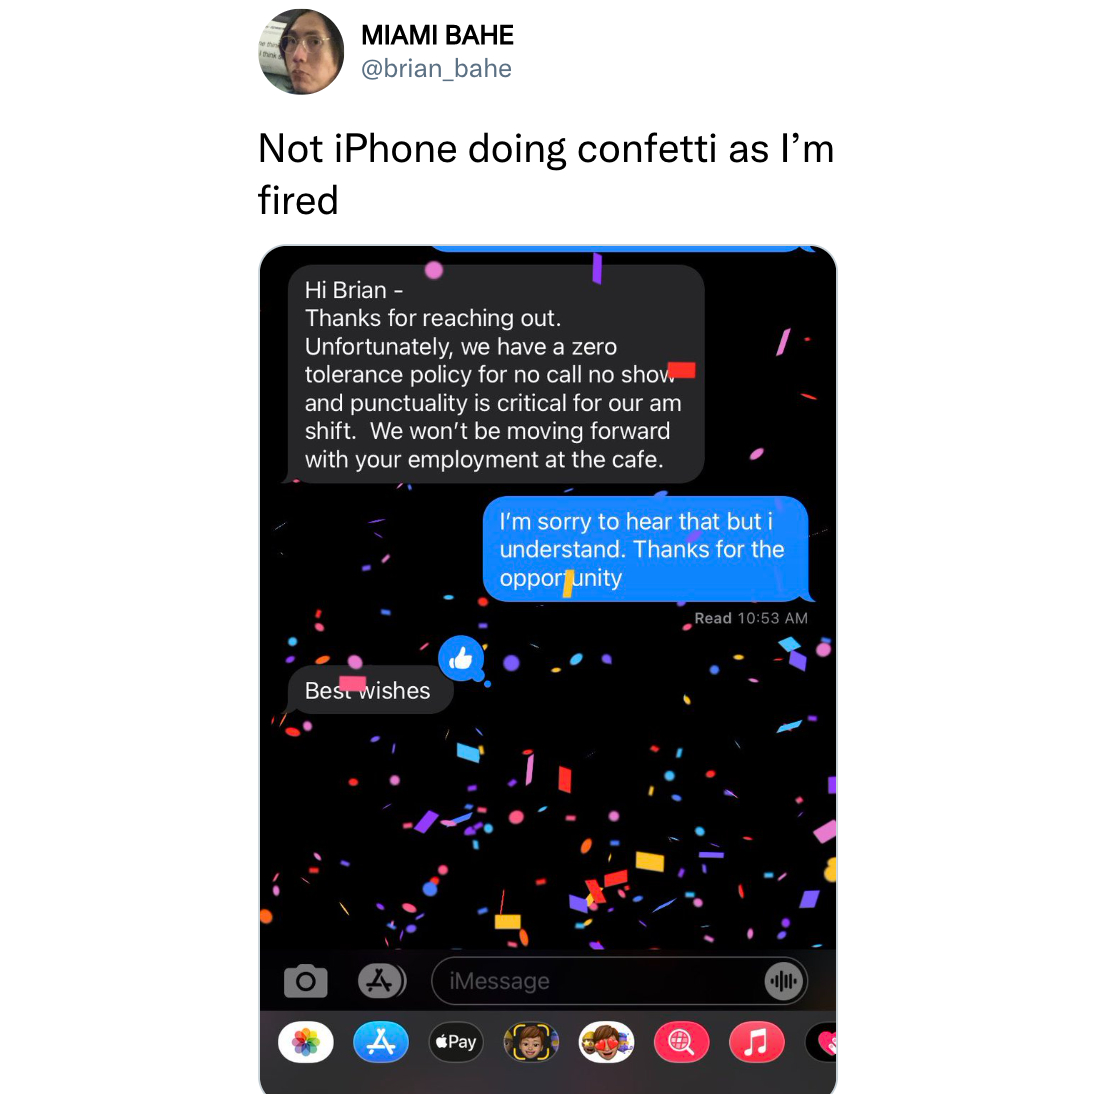 funny memes and tweets - multimedia - Miami Bahe Not iPhone doing confetti as I'm fired Hi Brian Thanks for reaching out. Unfortunately, we have a zero tolerance policy for no call no shov and punctuality is critical for our am shift. We won't be moving f